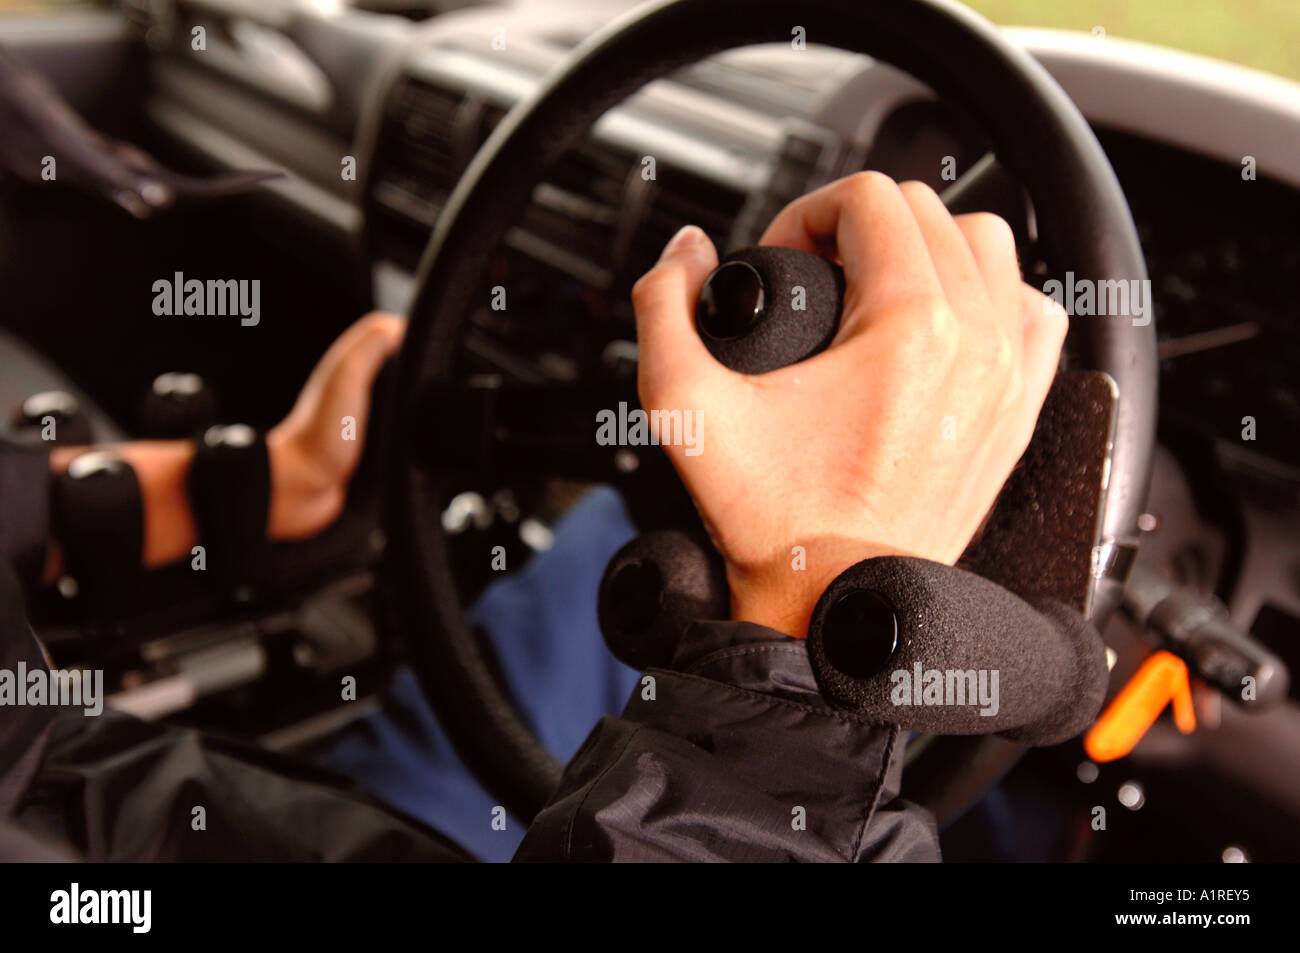 A MOTOR CARS DRIVING CONTROLS ADAPTED FOR A DISABLED DRIVER Stock Photo